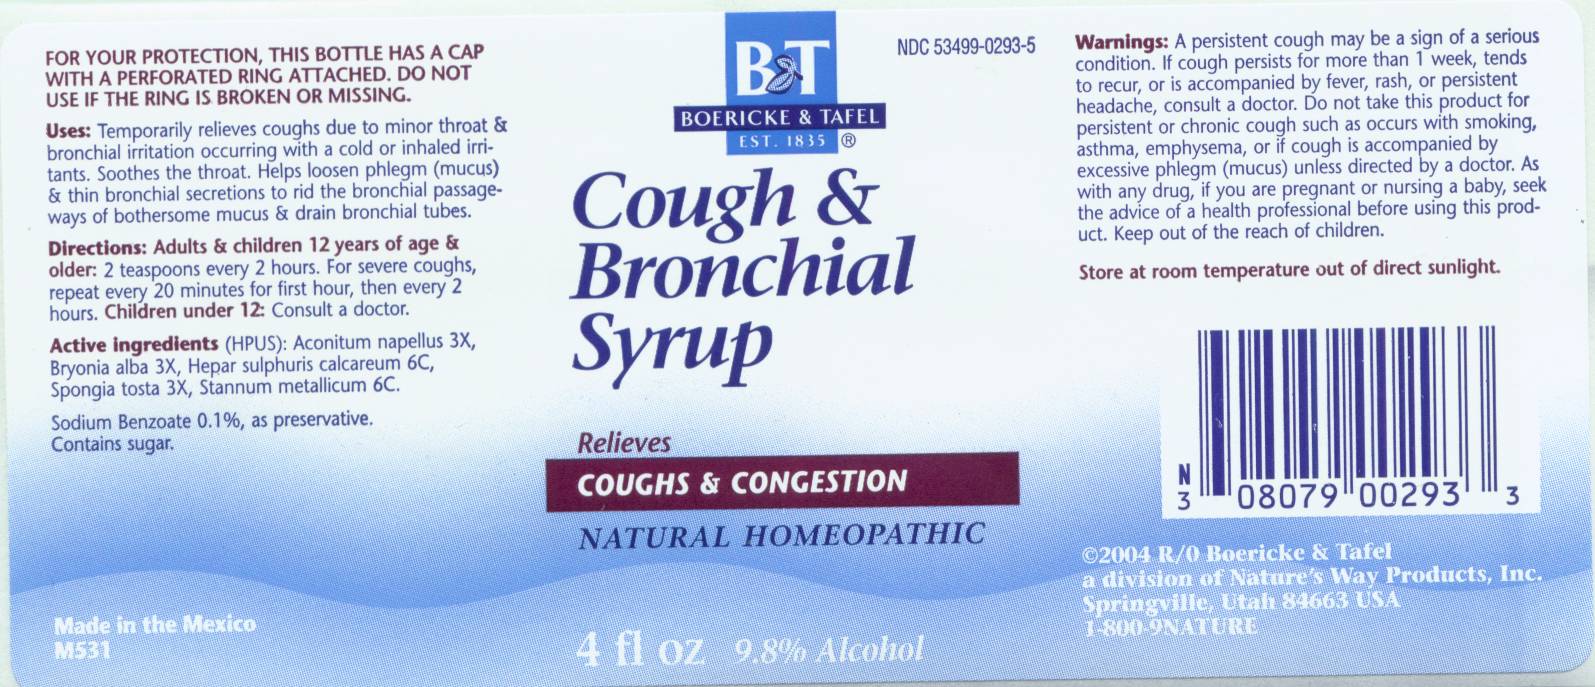 Cough and Bronchial bottle